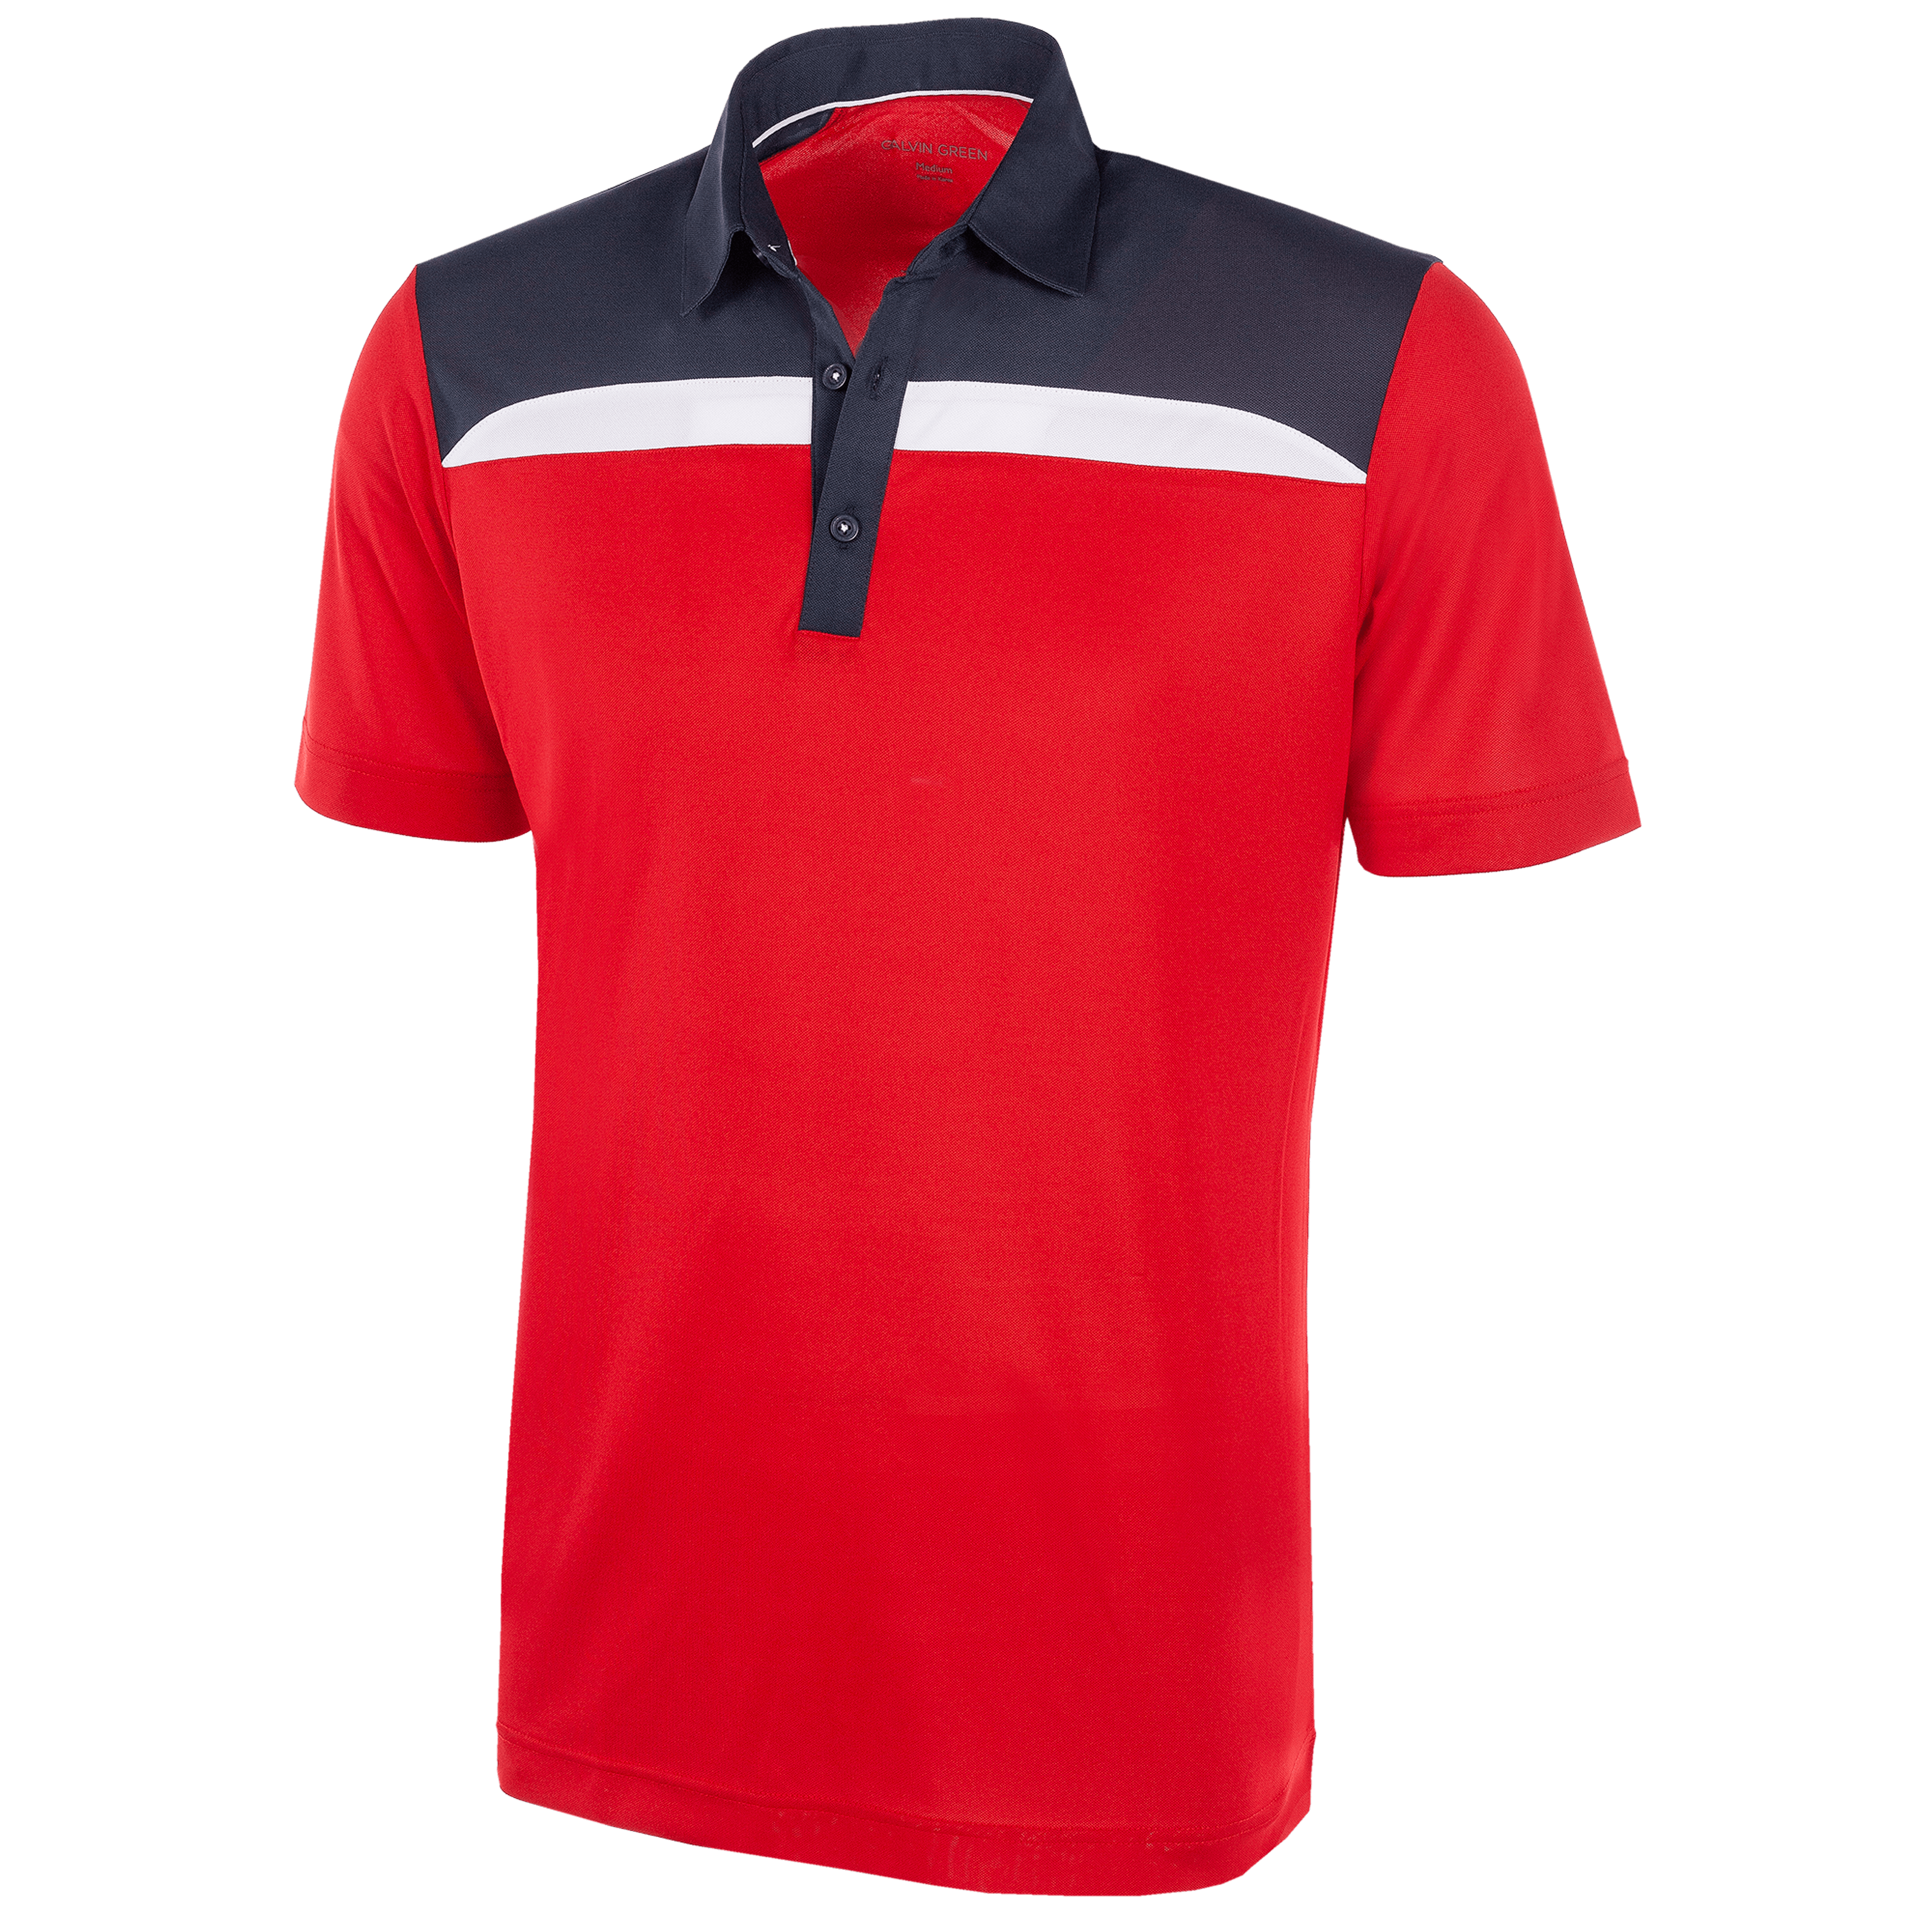 Galvin Green Mapping Ventil8 Plus Polo Shirt